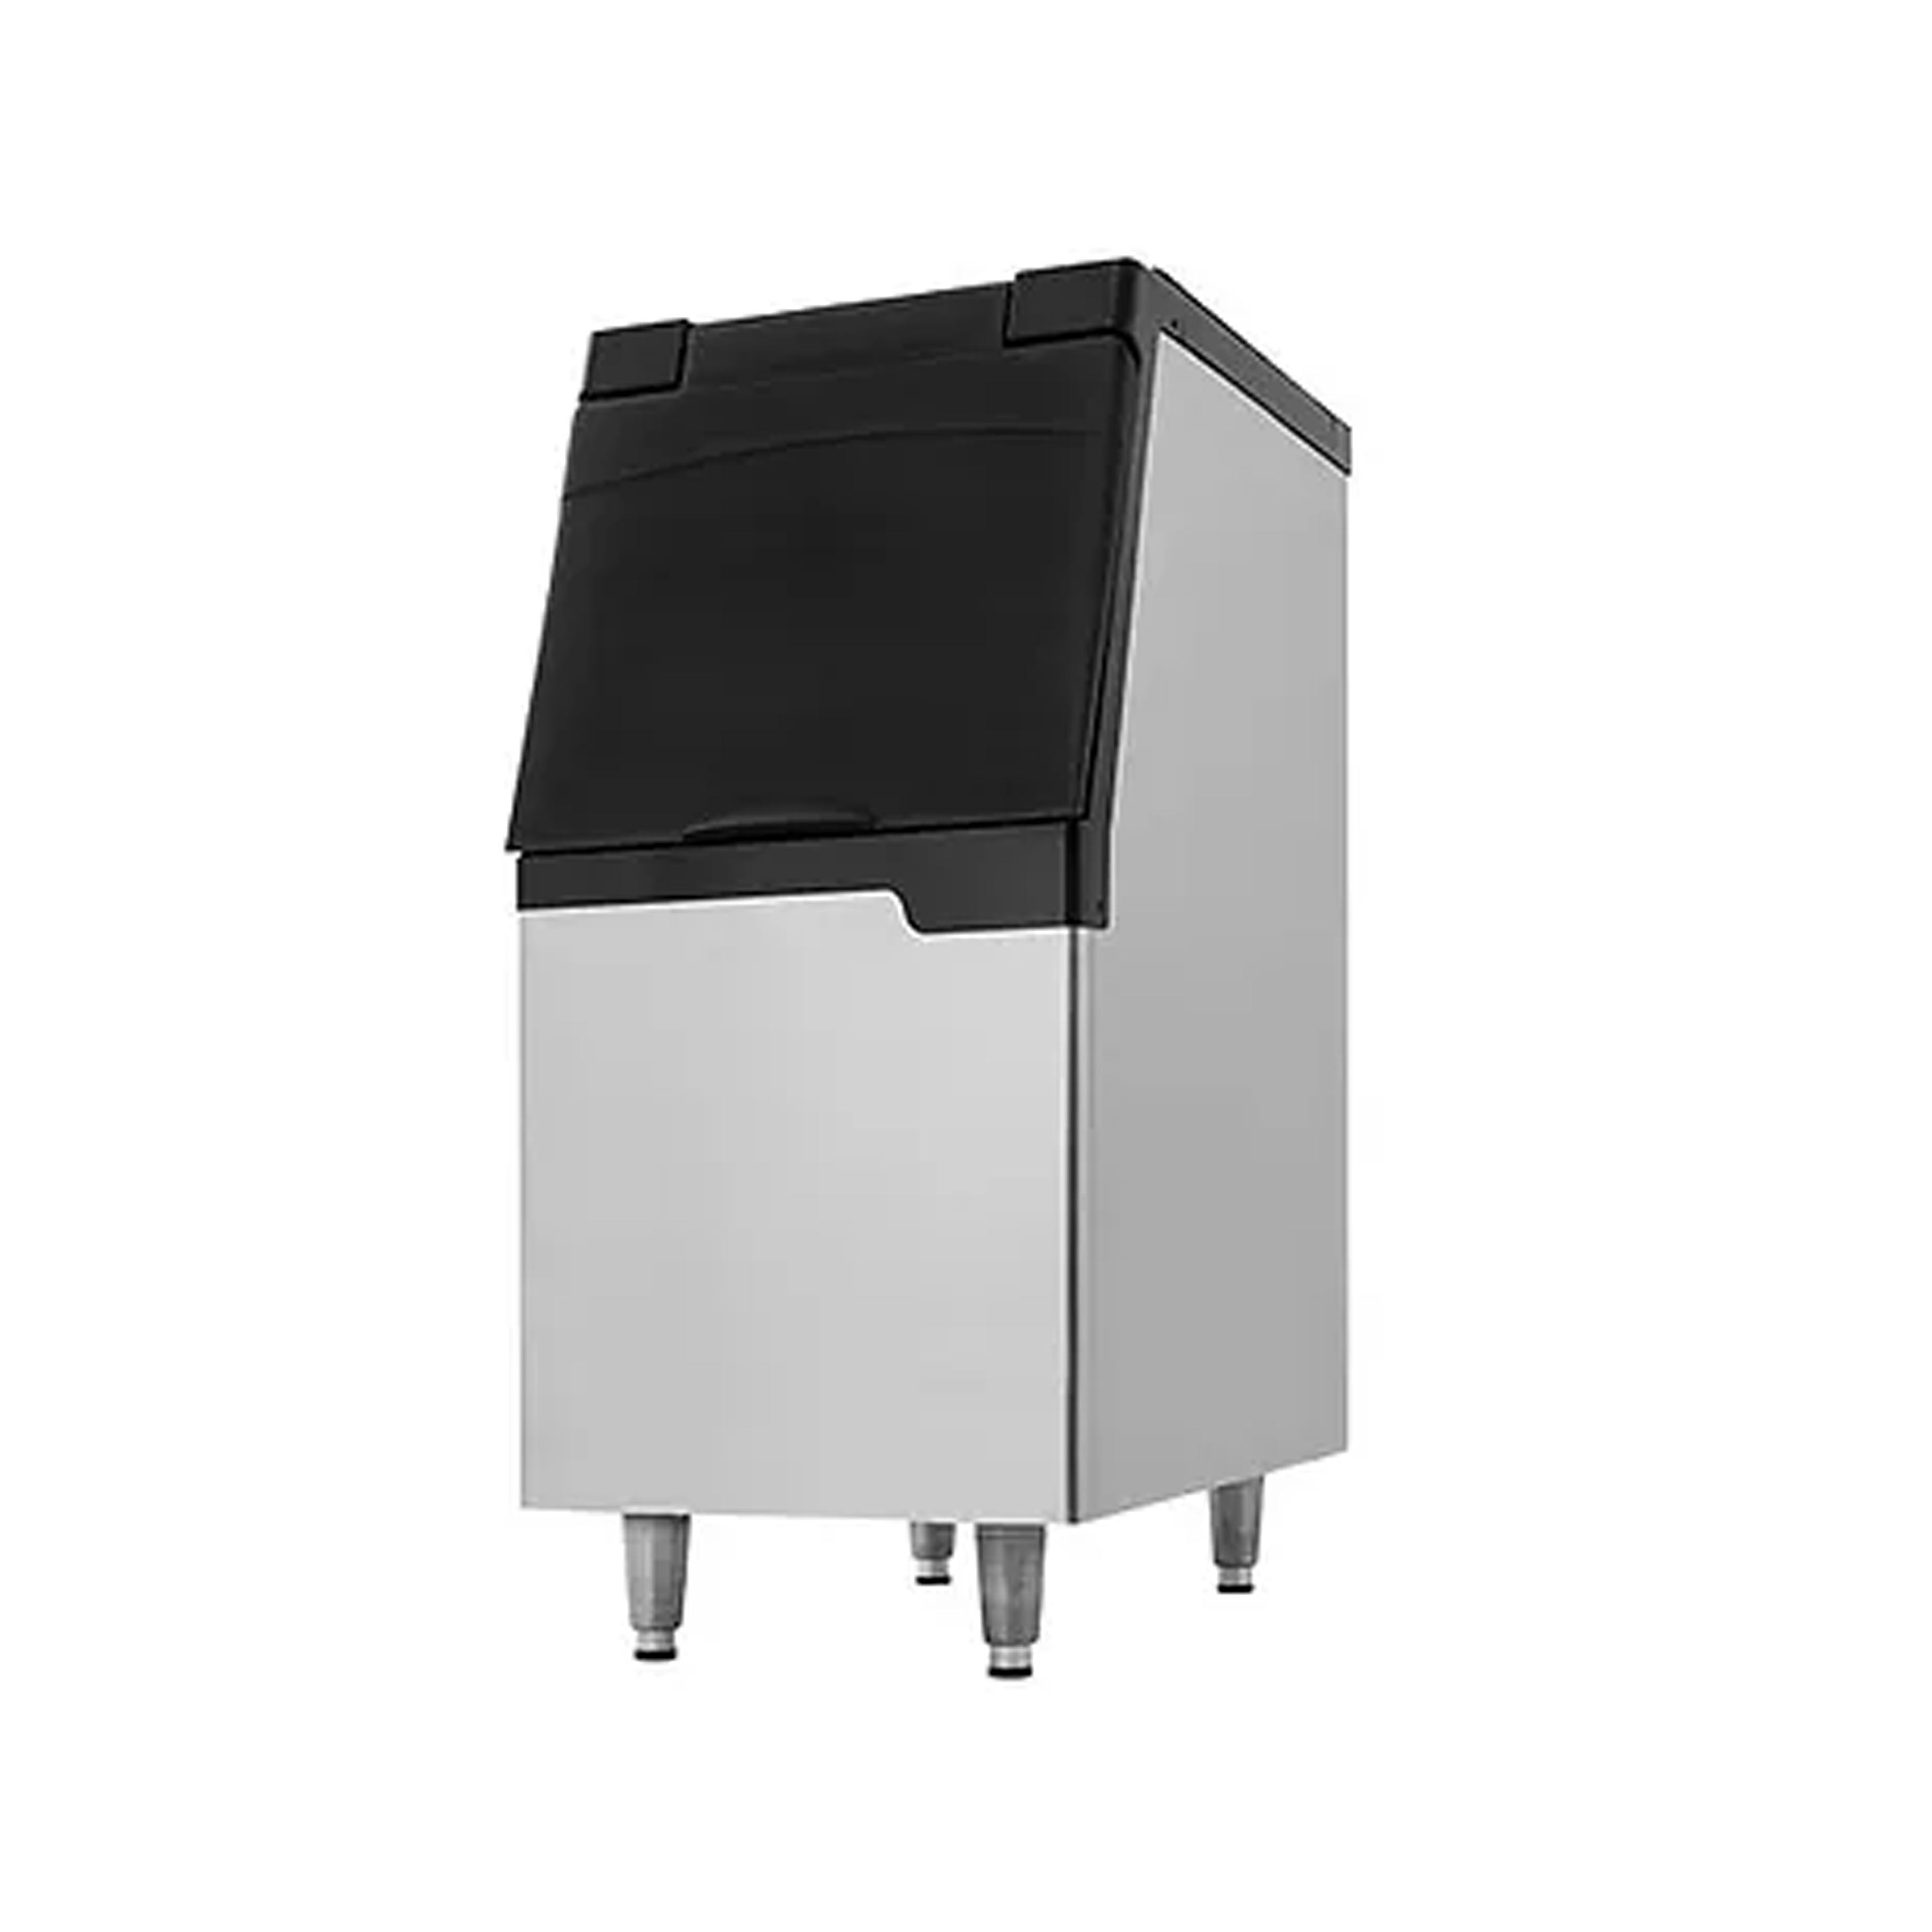 Icetro - IB-026-22, Commercial 22" Wide Stainless Steel Ice Bin 265lbs